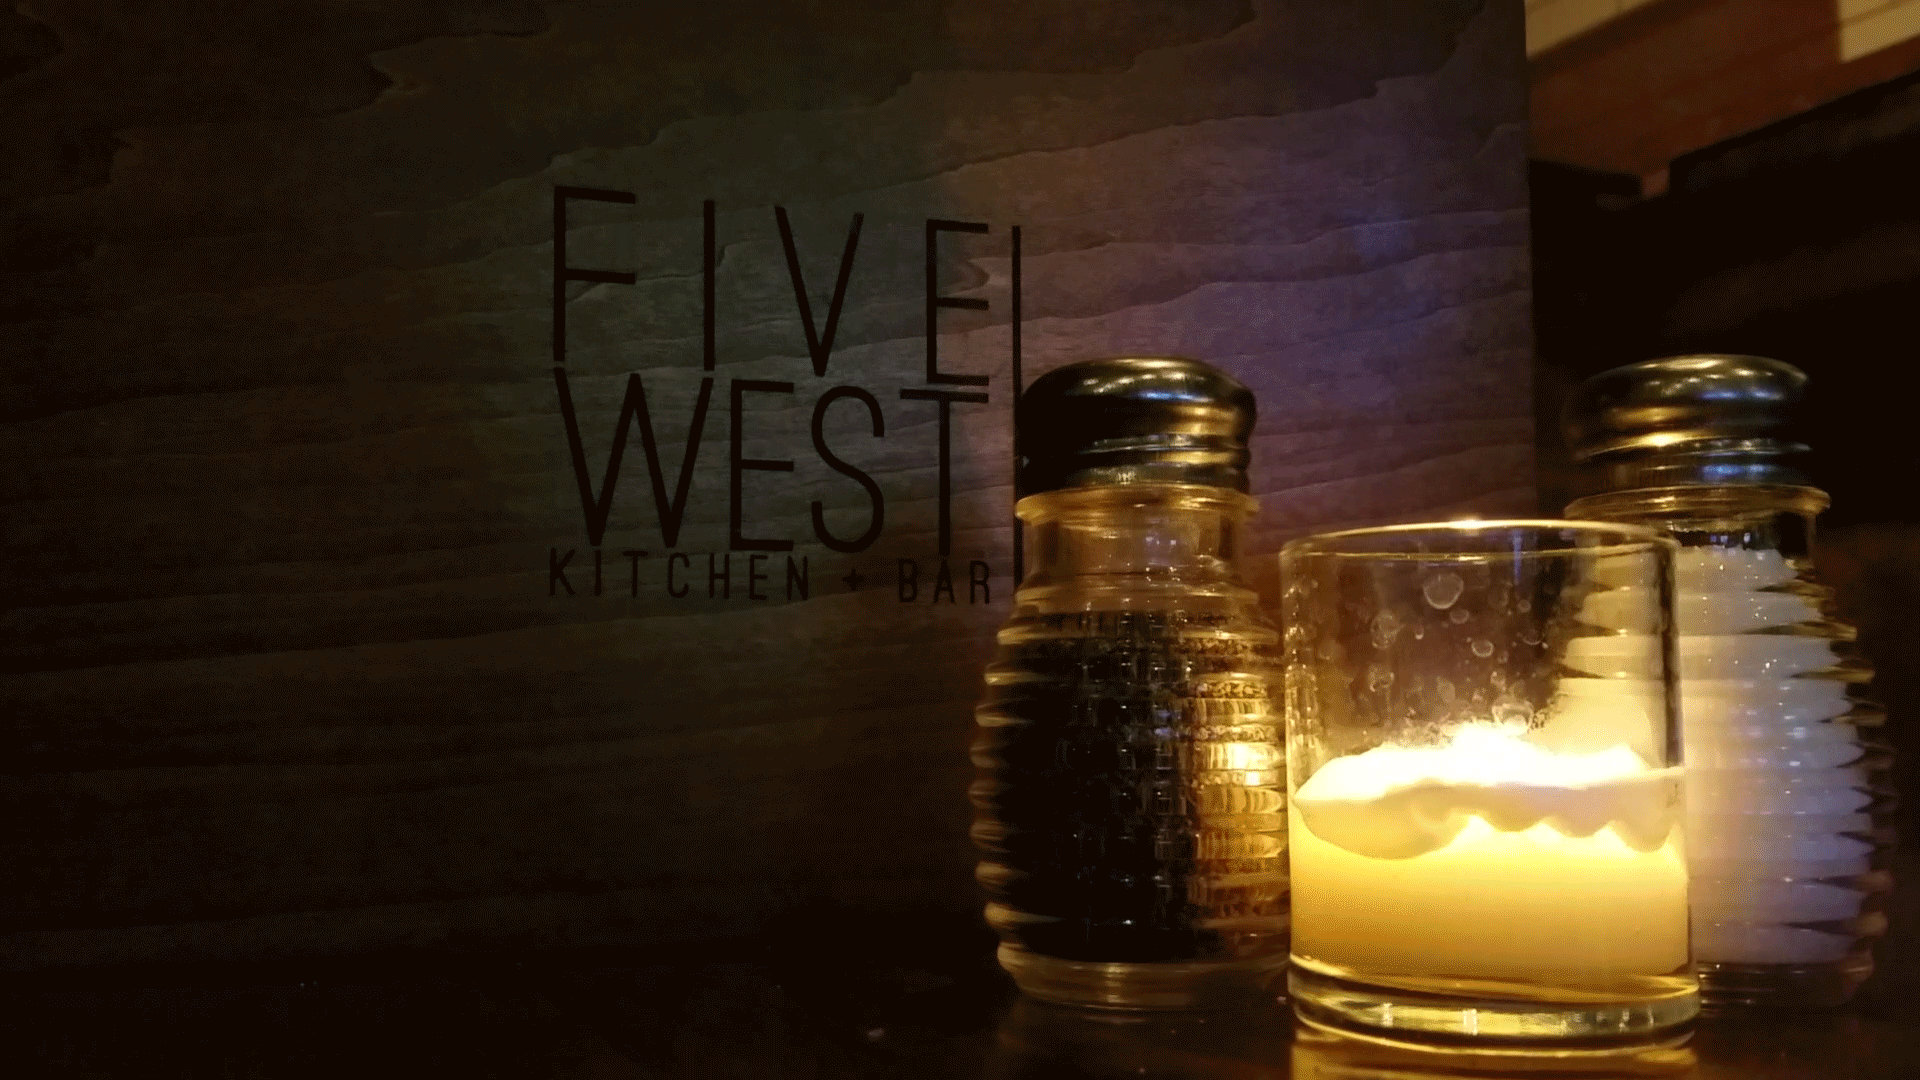 Five West Cinemagraph